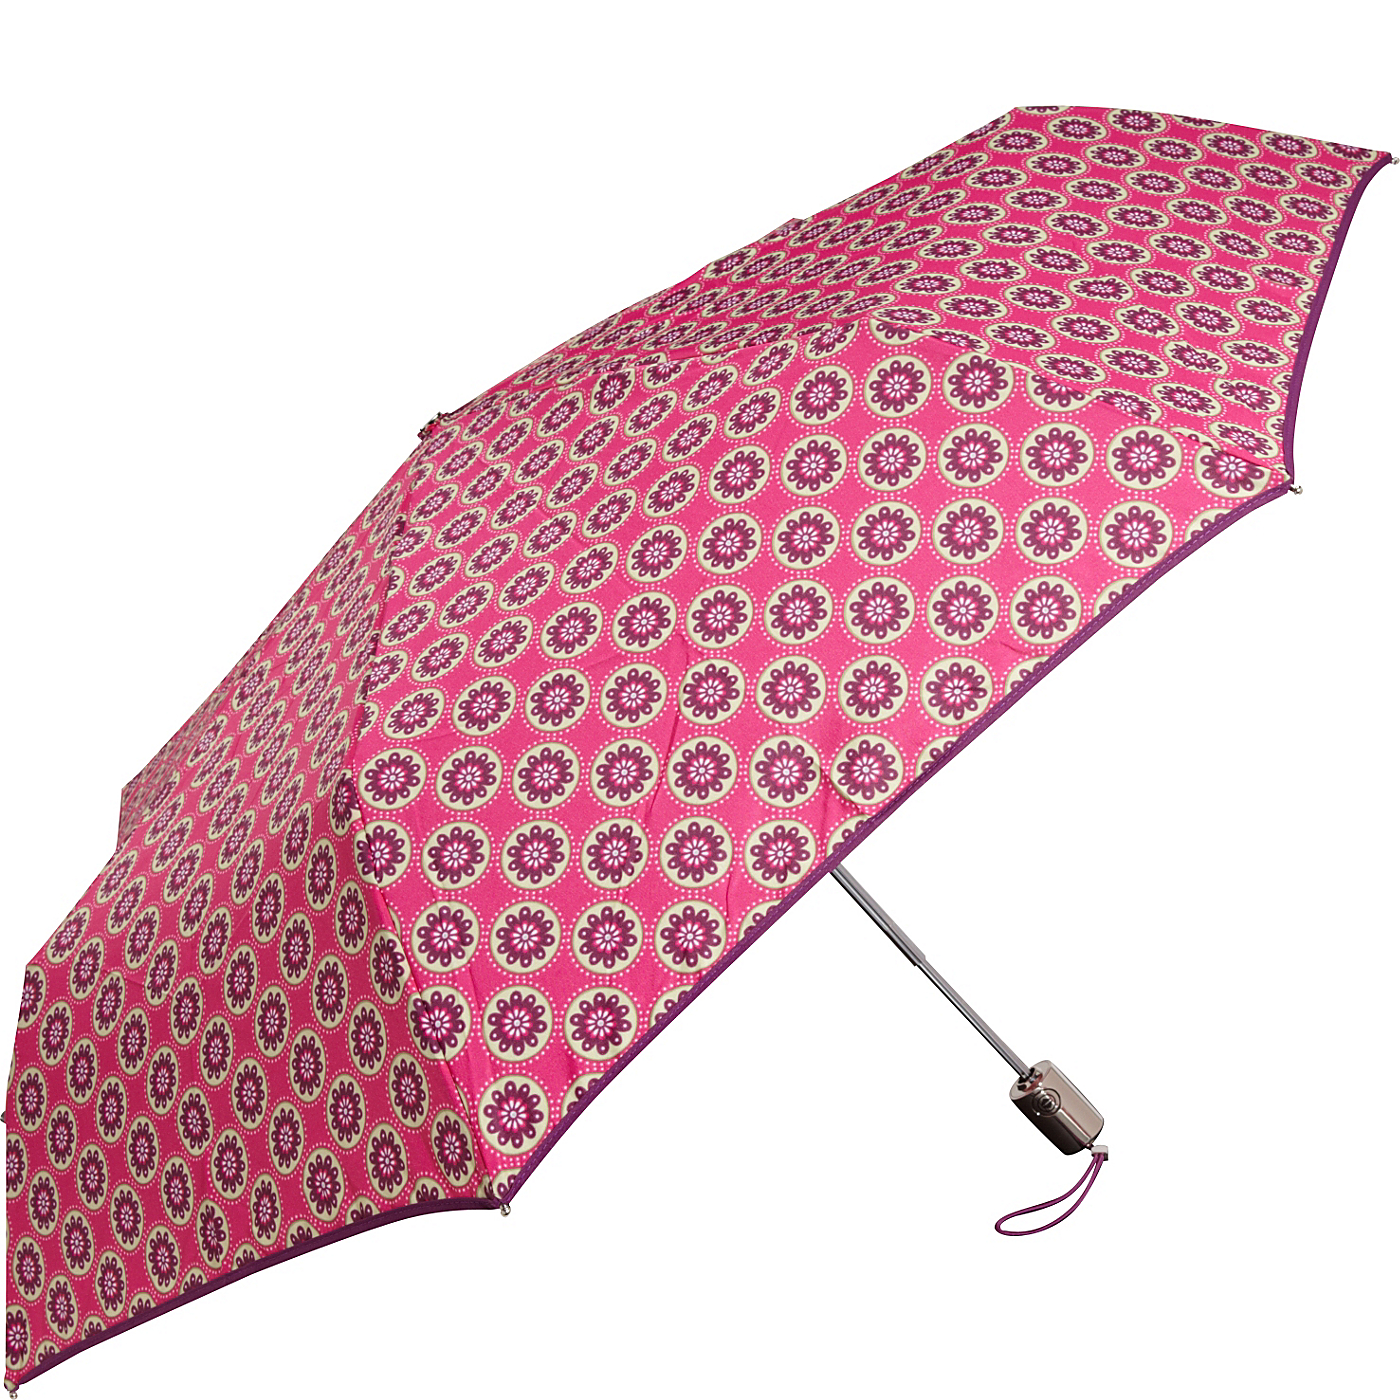 Vera Bradley Umbrella Very Berry Paisley $32.00 Coupons Not Applicable